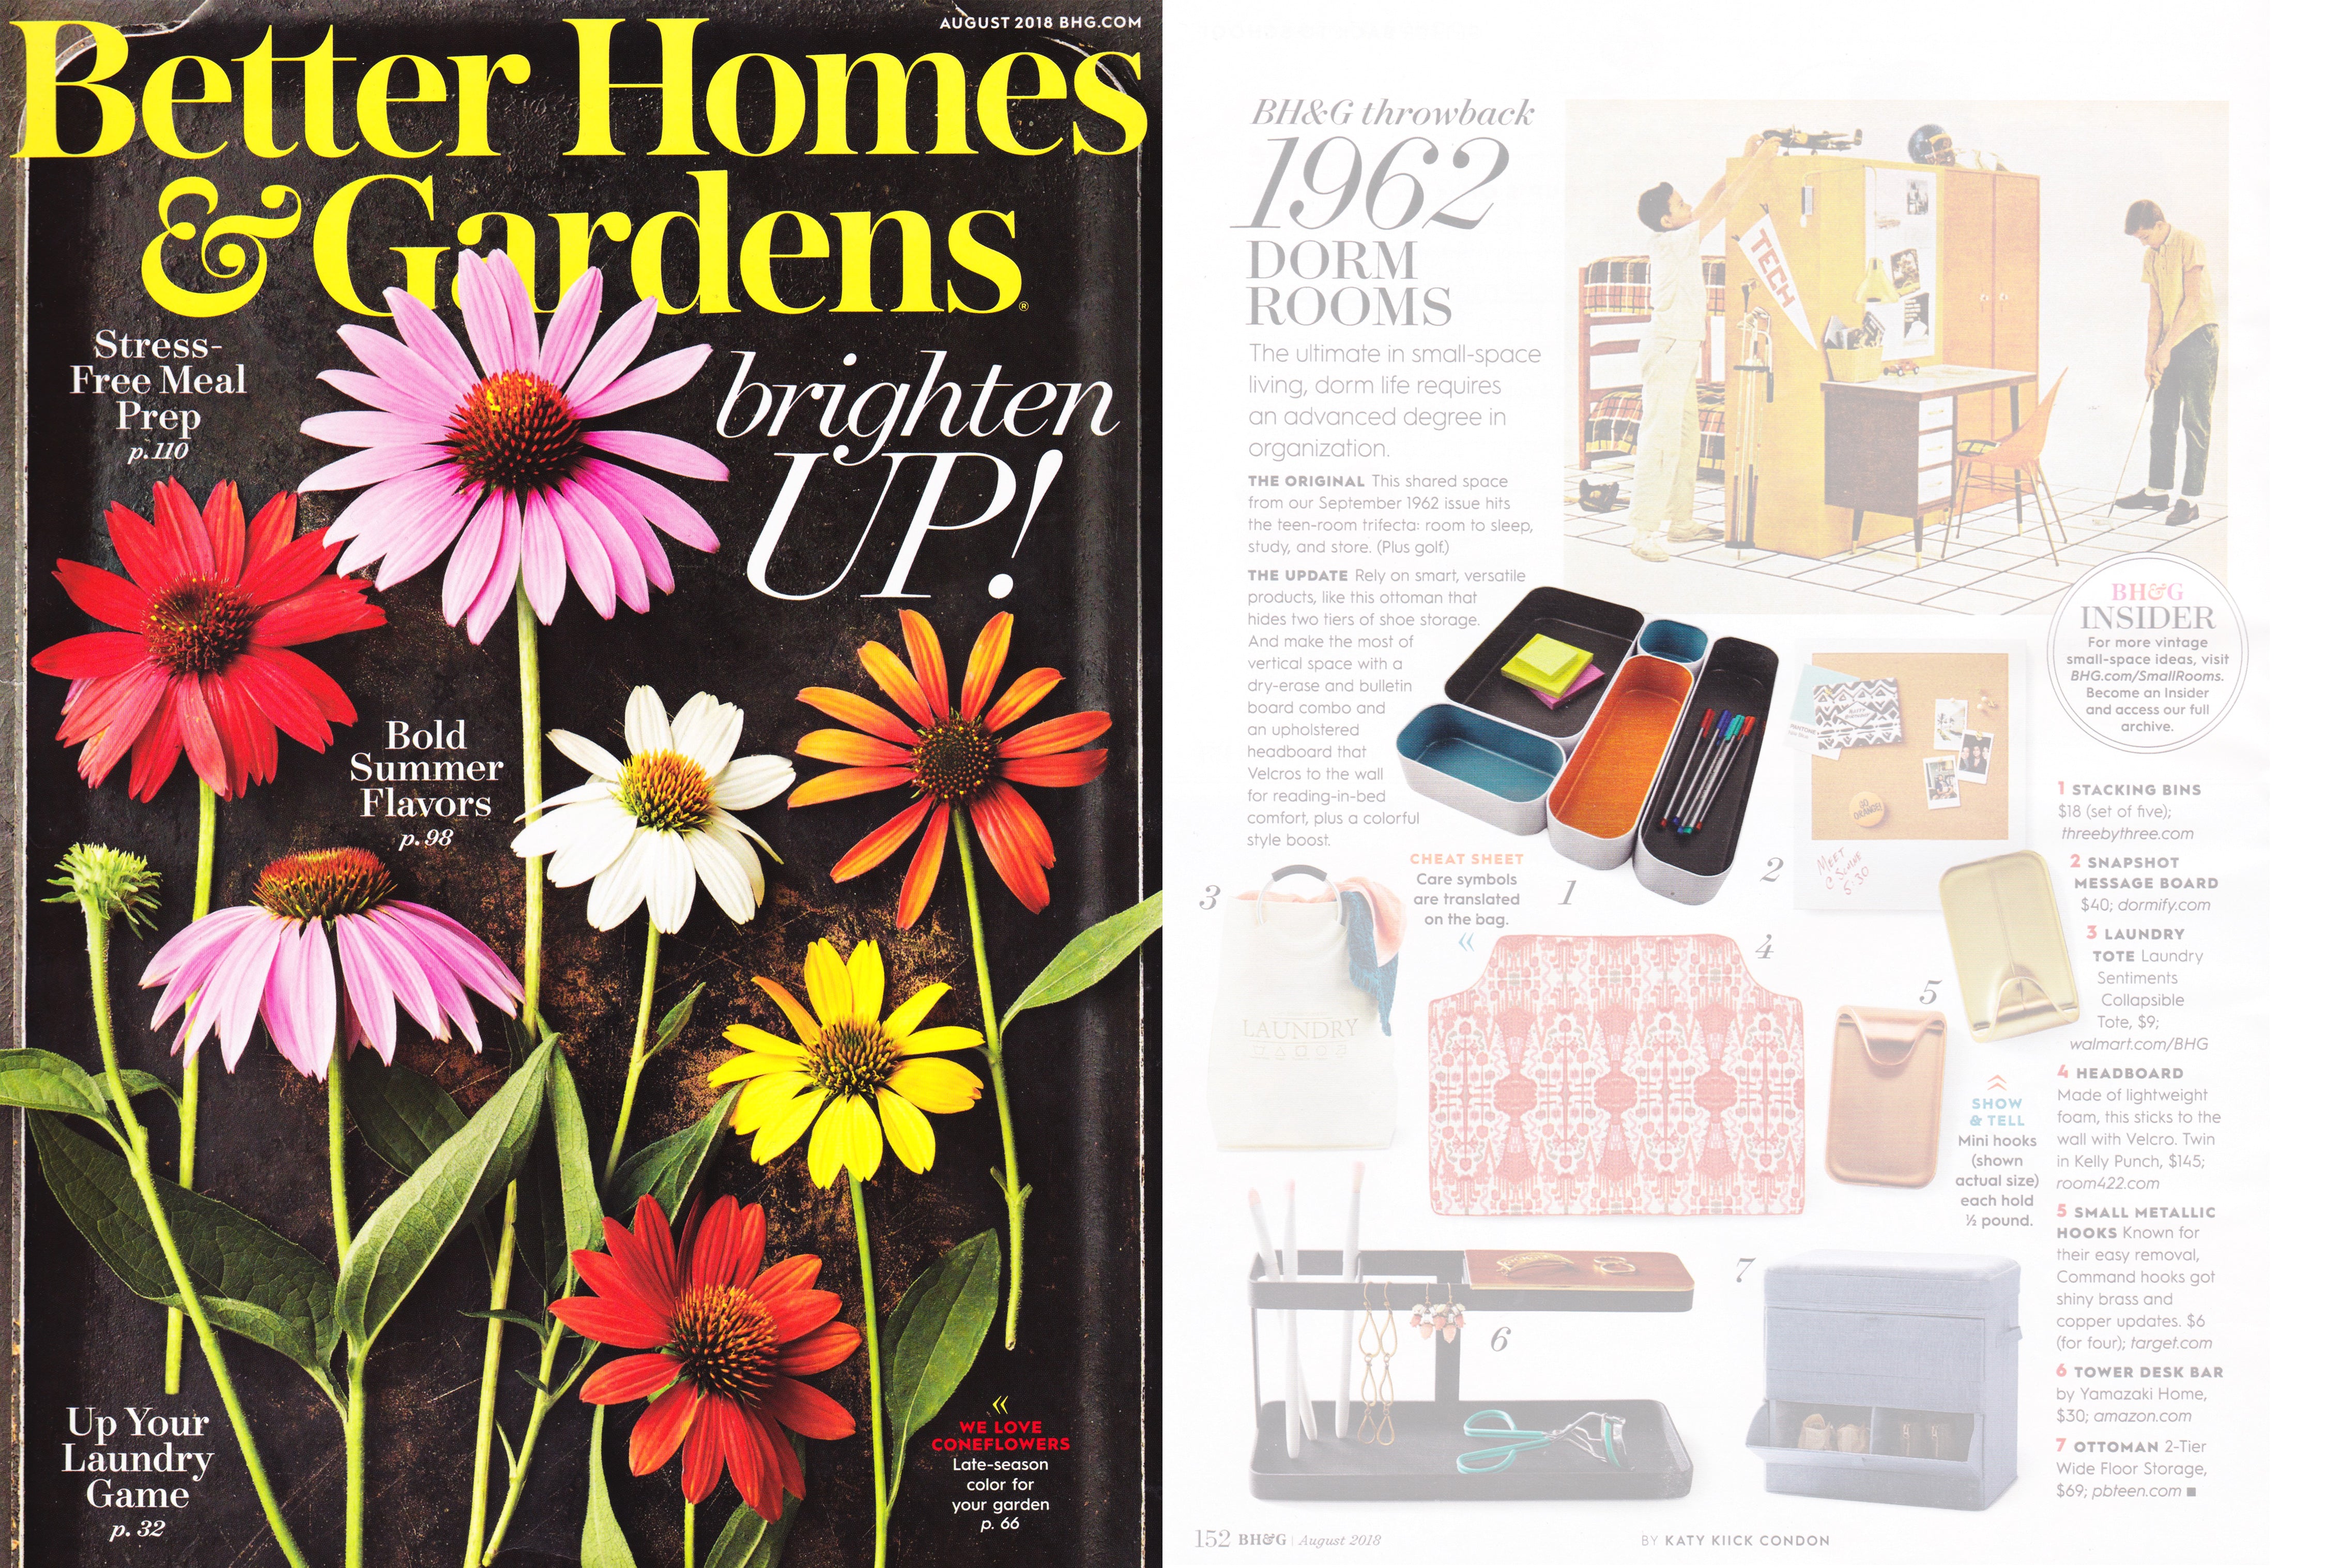 Stacking bins featured in Better Homes & Gardens magazine